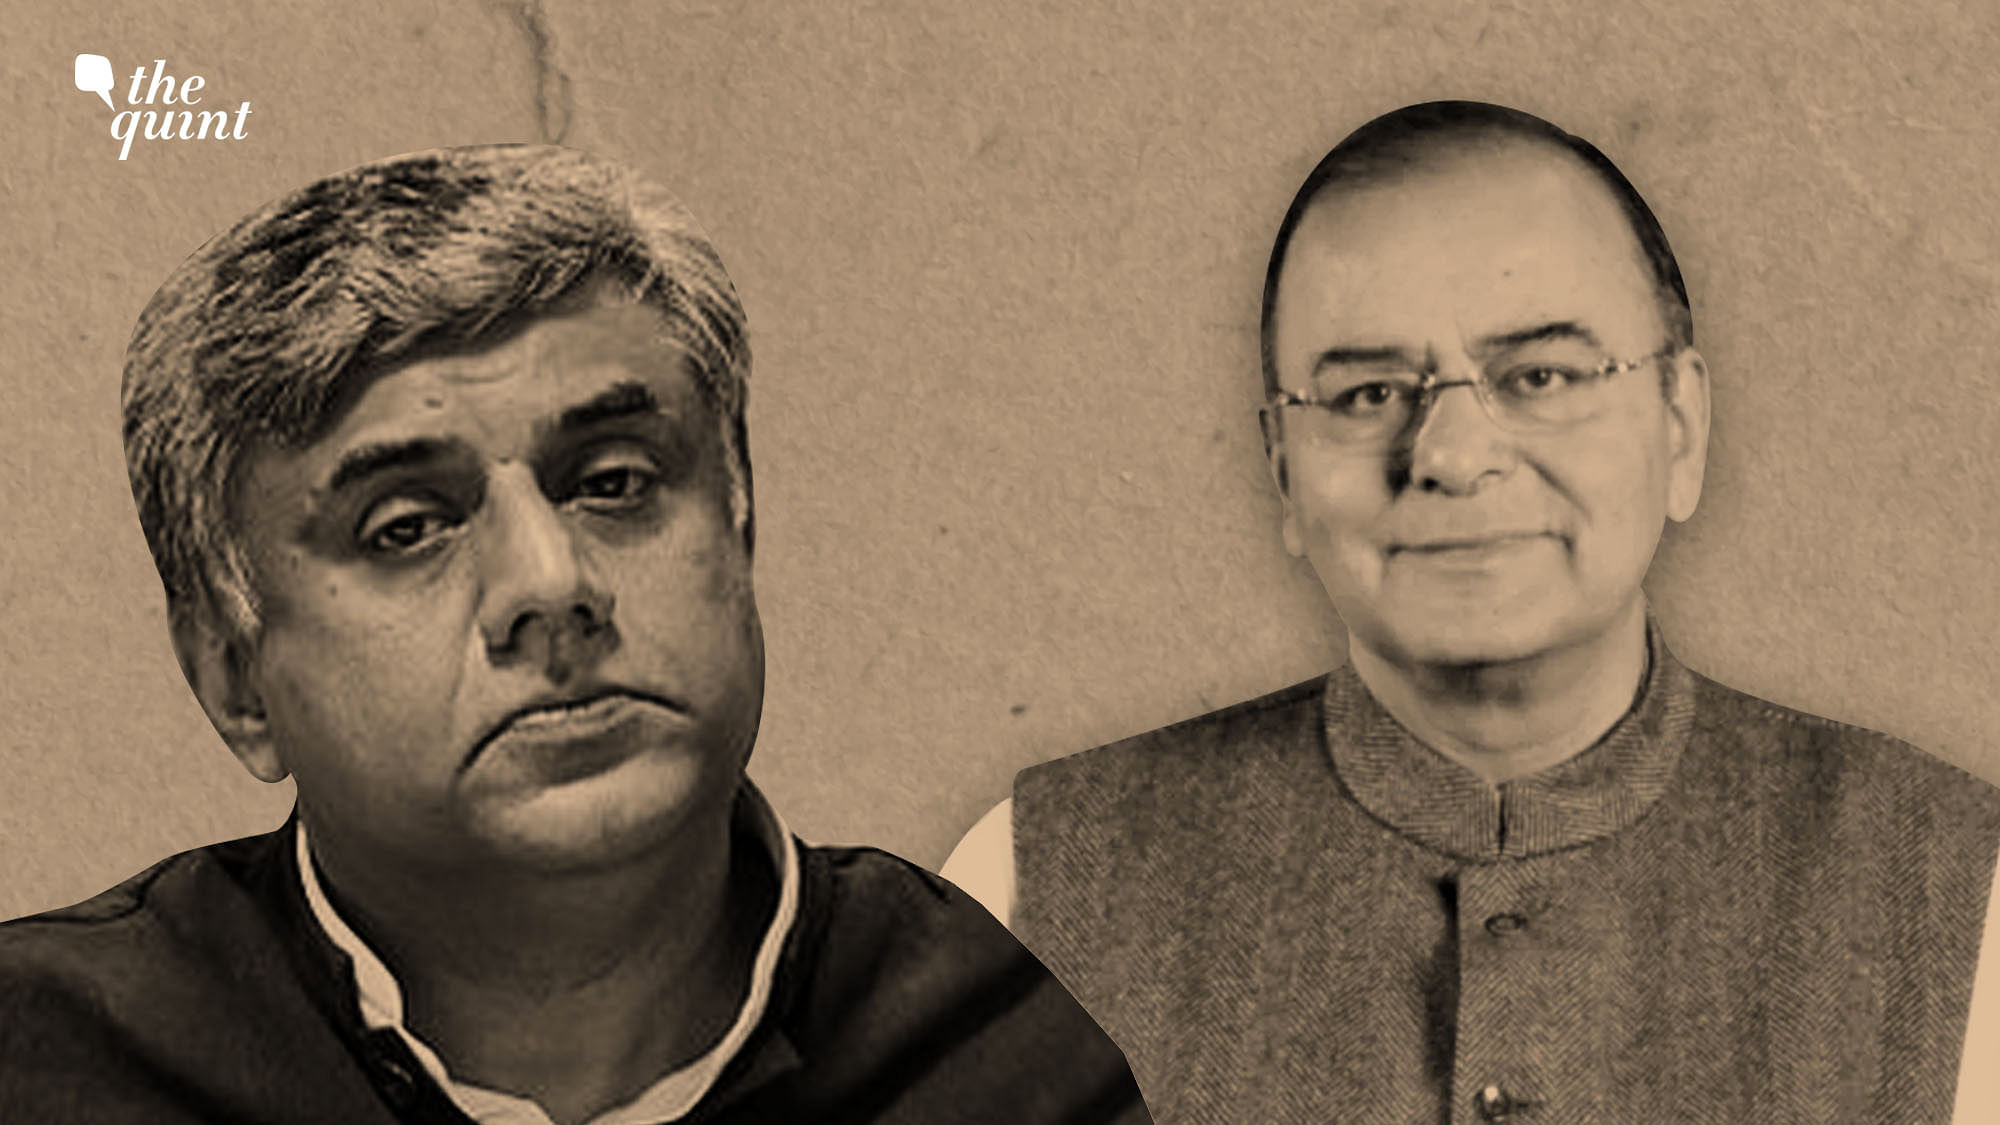 Image of MV Rajeev Gowda (L) and the late Arun Jaitley (R) used for representational purposes.